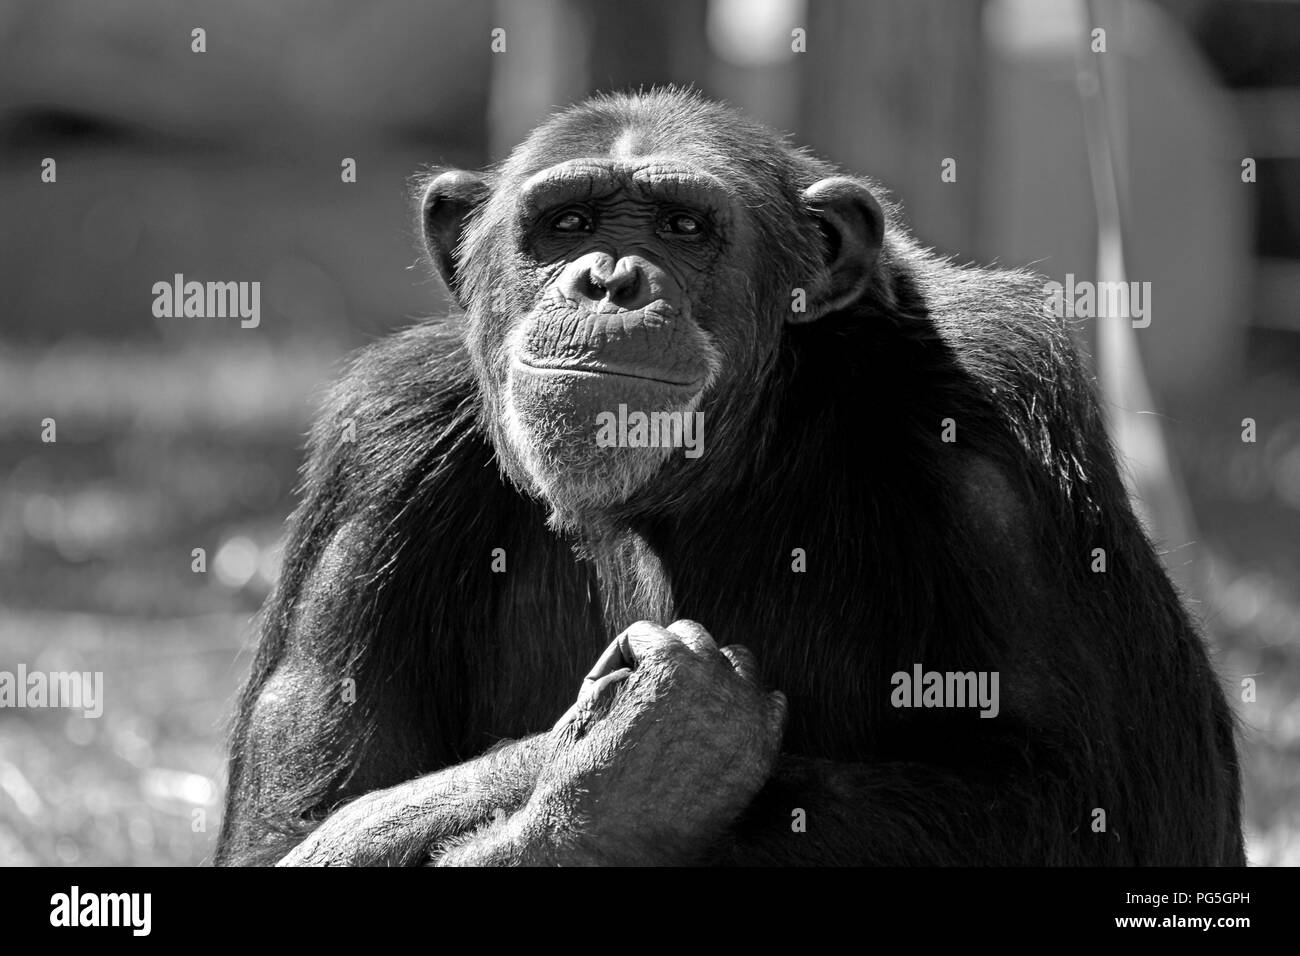 Black and white photograph of a common chimpanzee (P. troglodytes) in Monkey Town Primate Centre, Somerset West, South Africa. Stock Photo